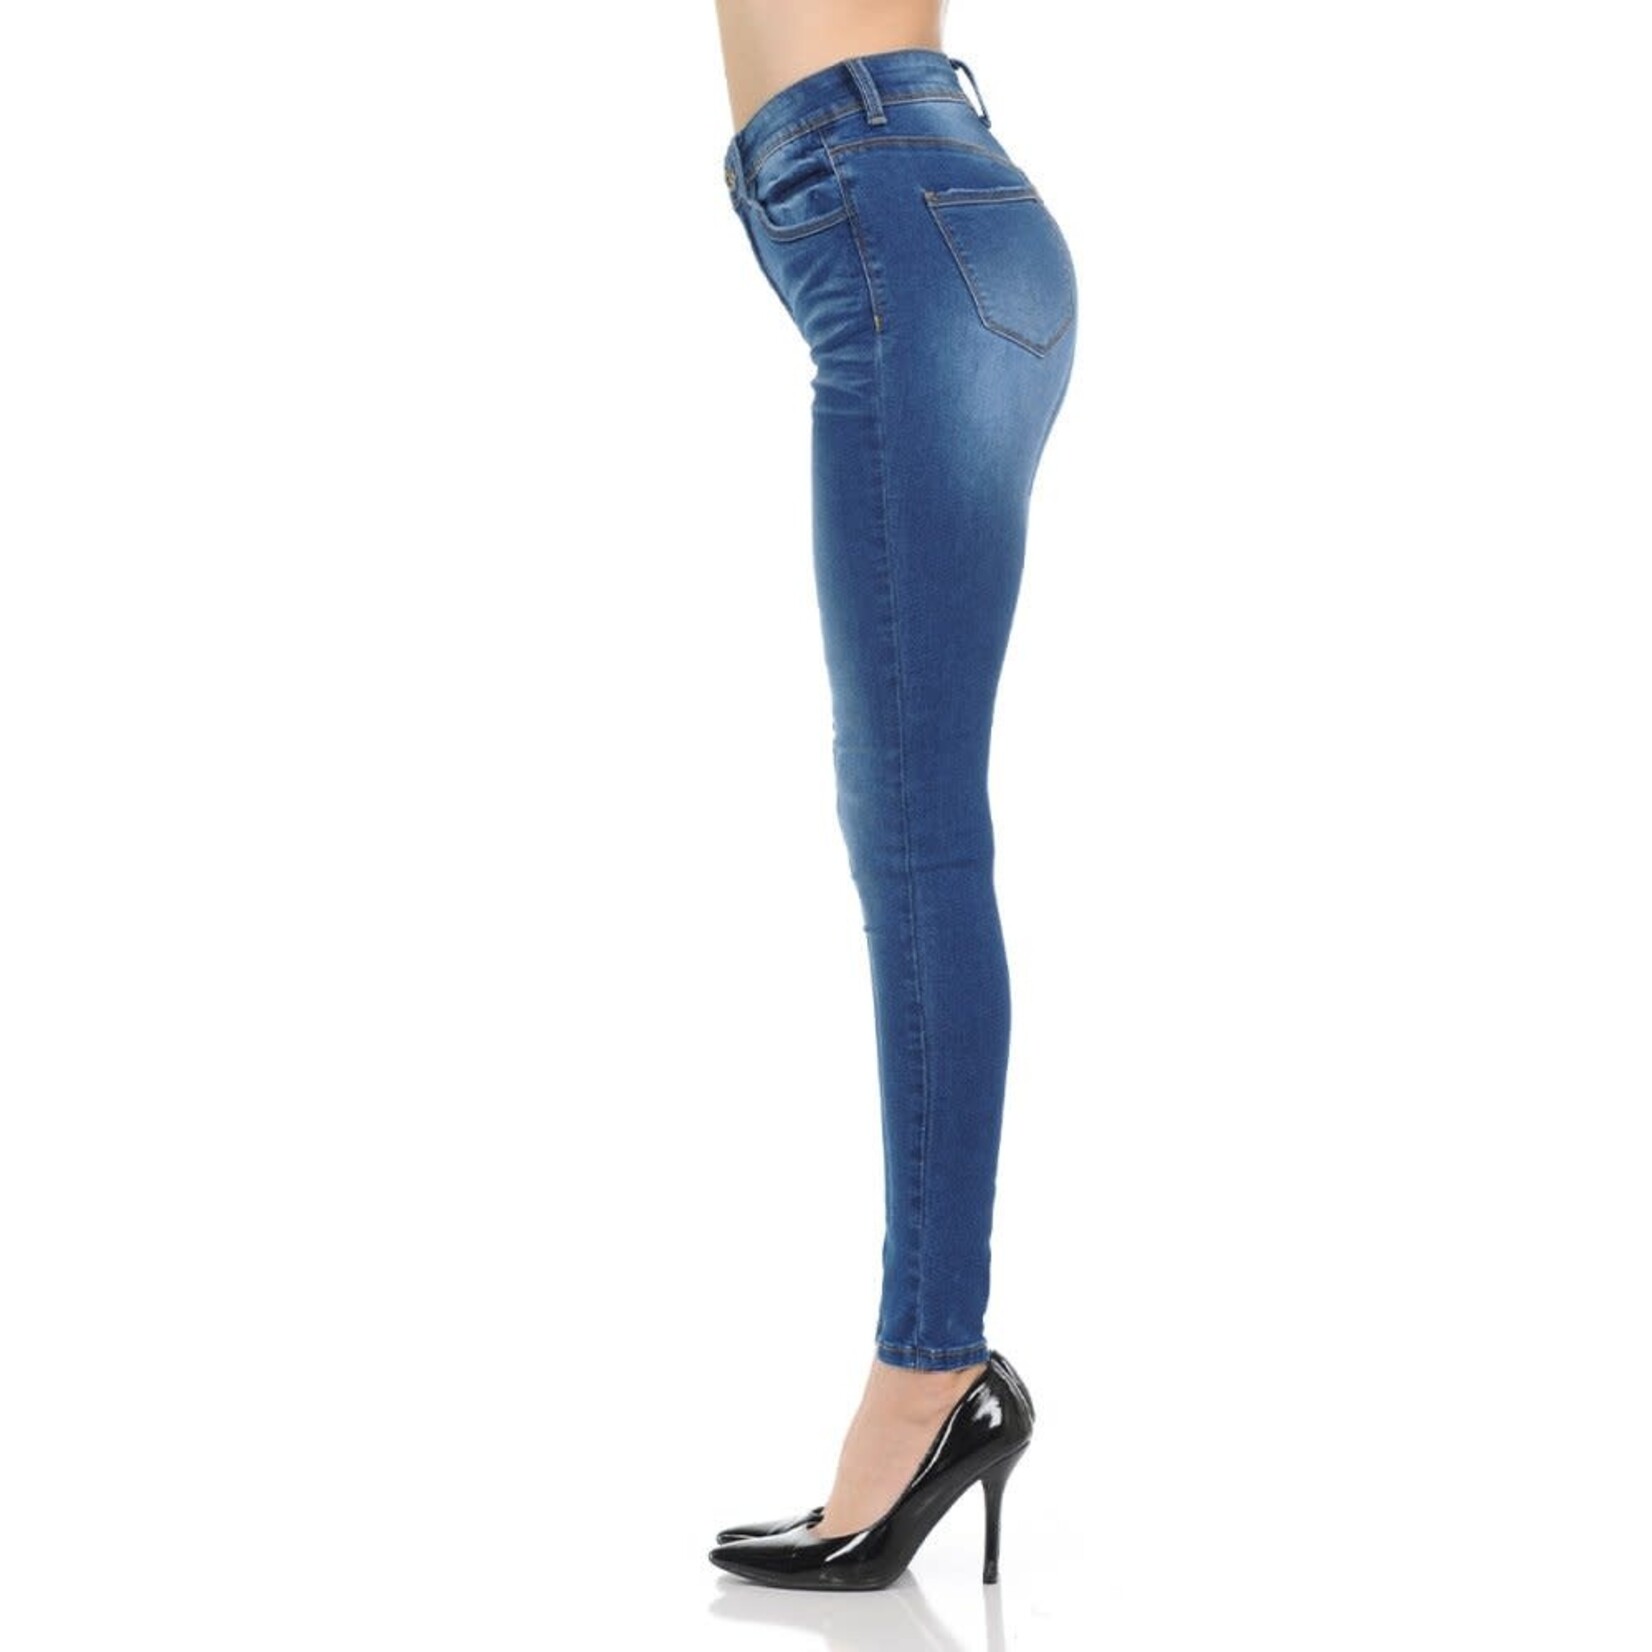 Wax Jeans Women's High Waisted Stretch Jeans 90123